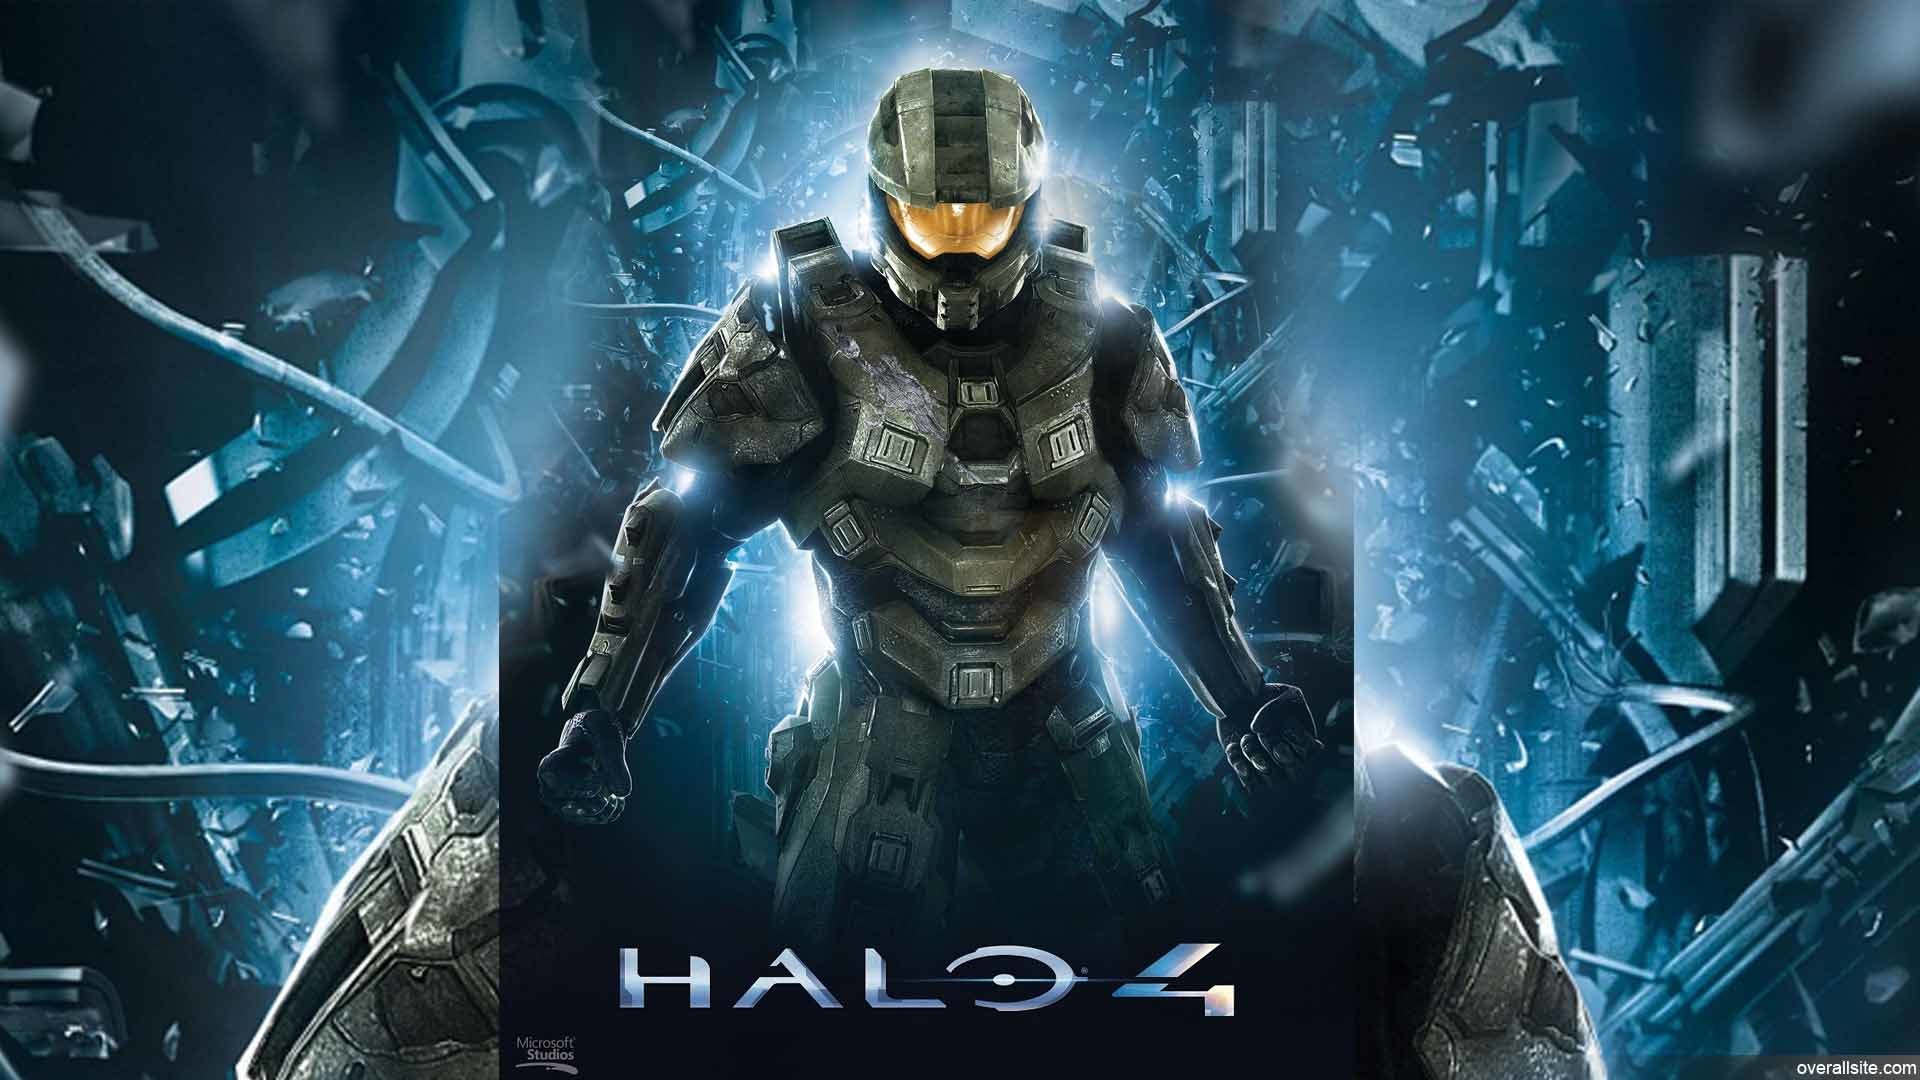 1920x1080 Hd Wallpapers Halo 4 Wallpapers Download 11778 Hd Wallpapers Was .